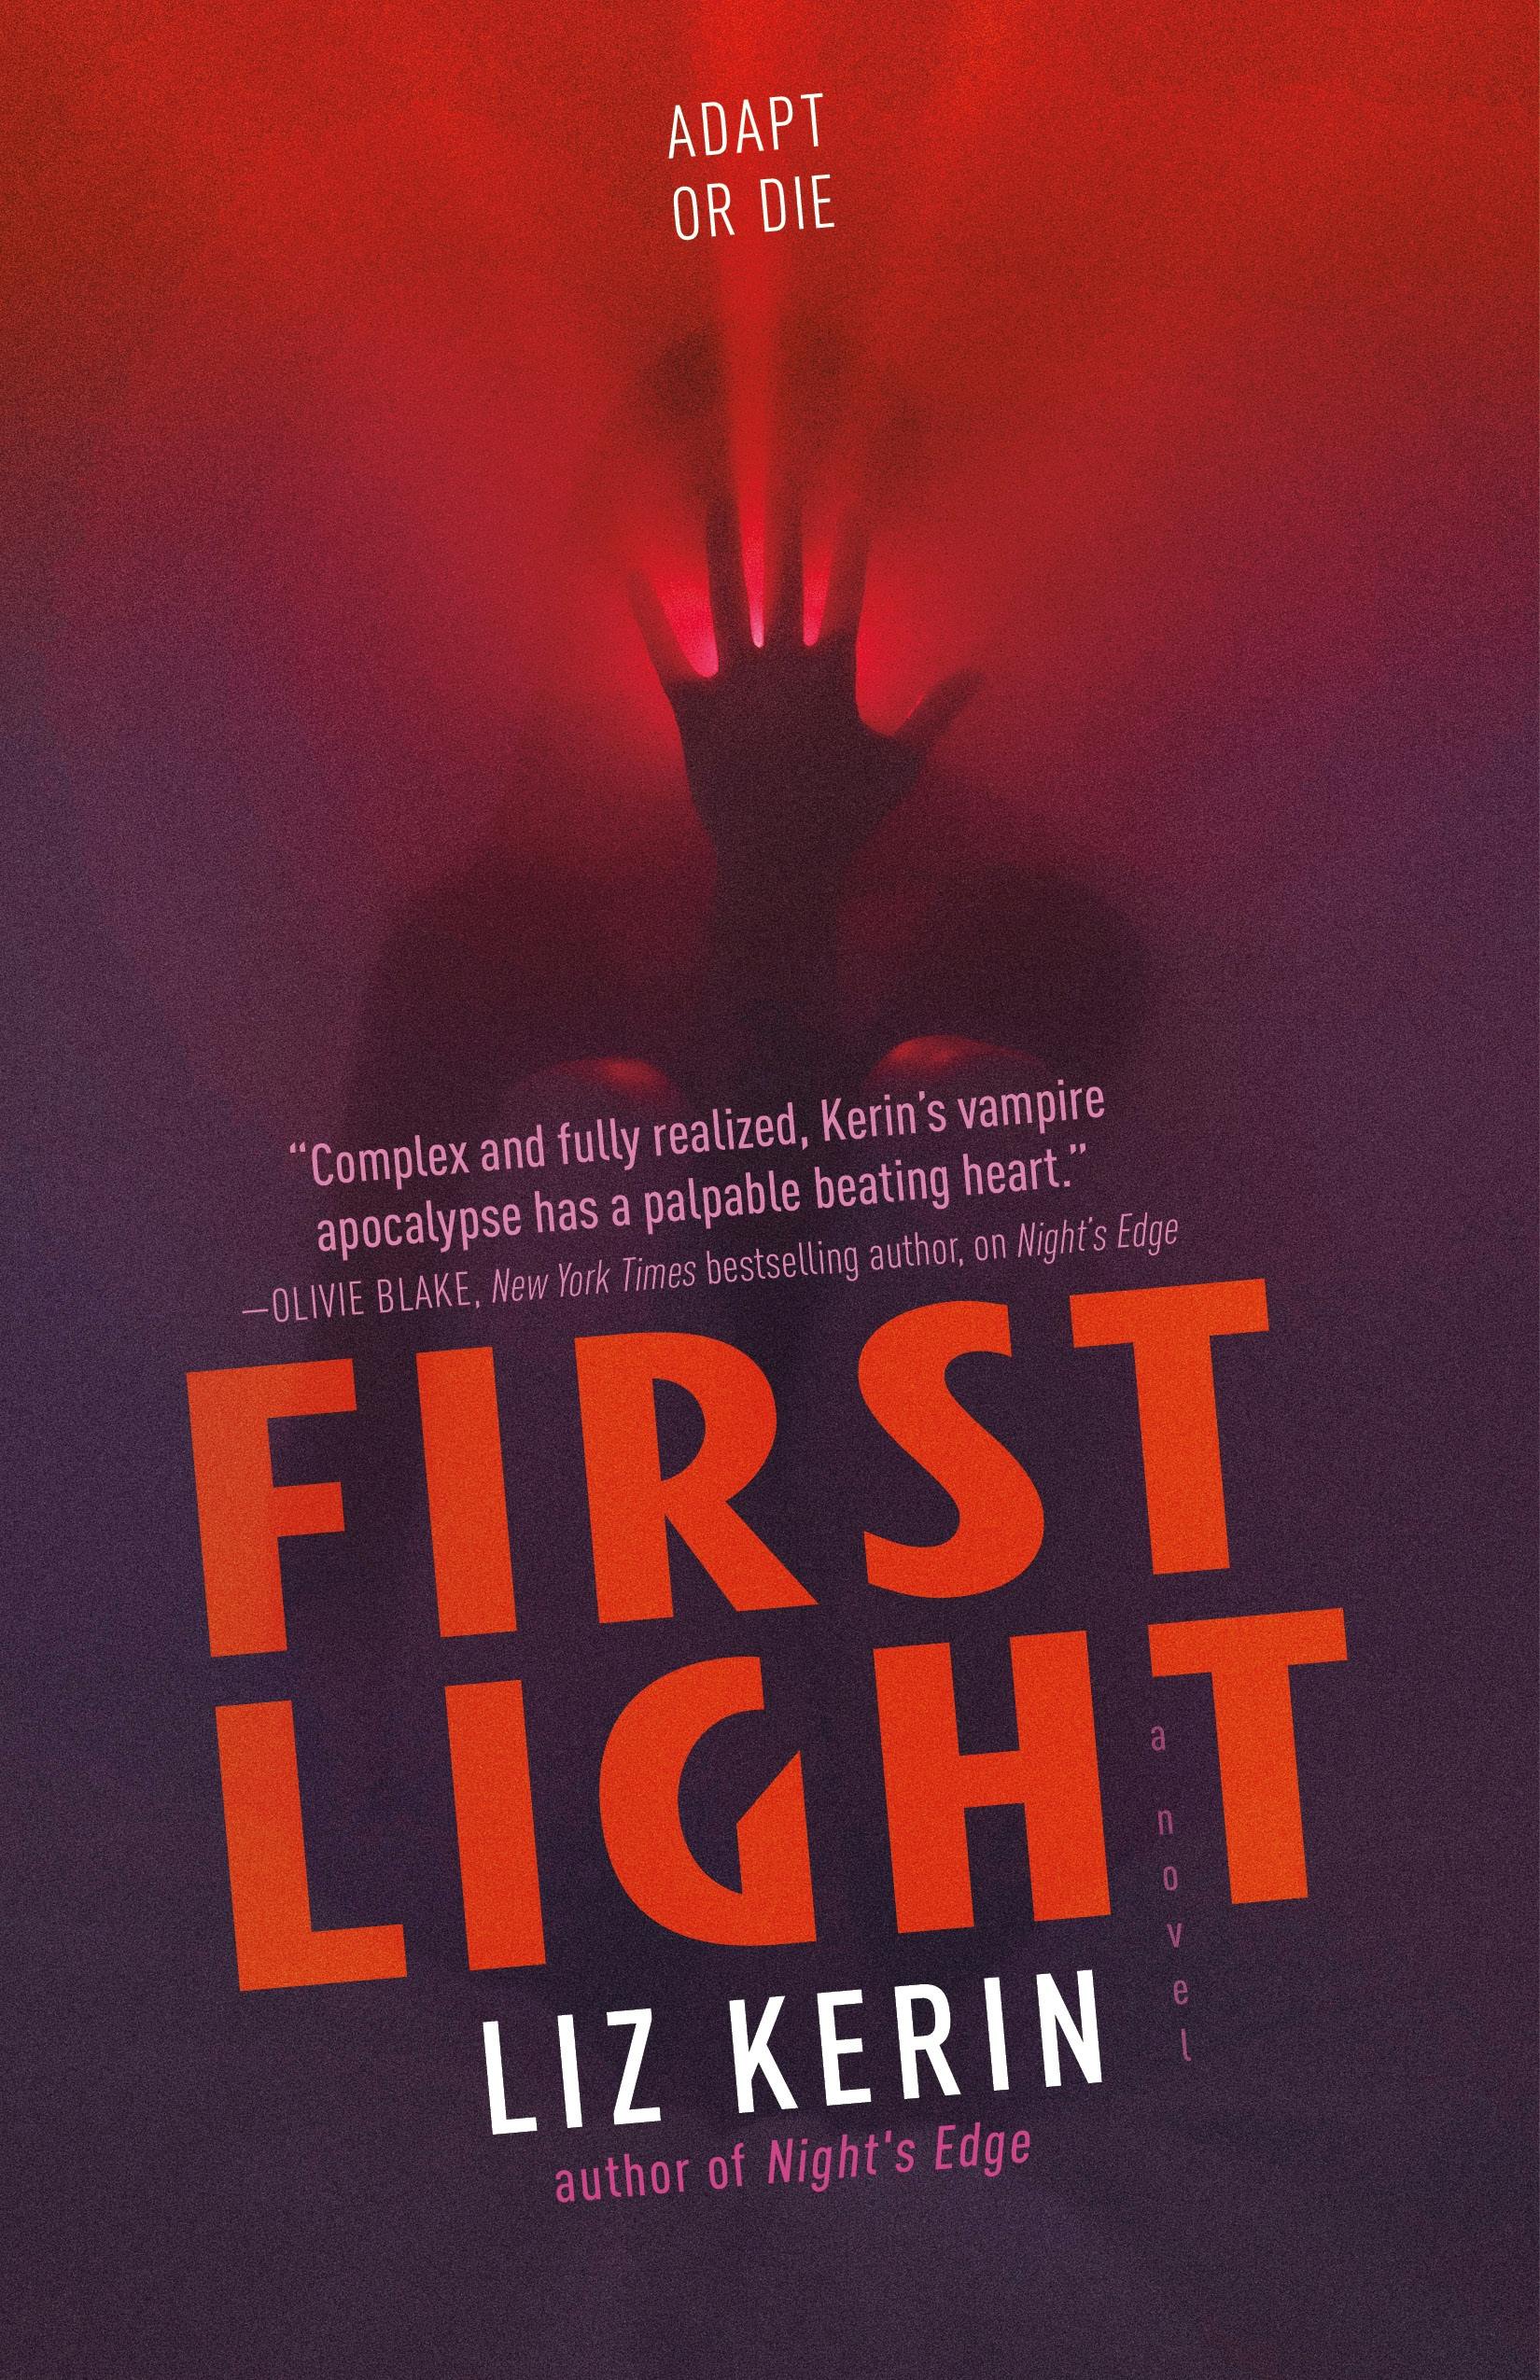 Cover for the book titled as: First Light